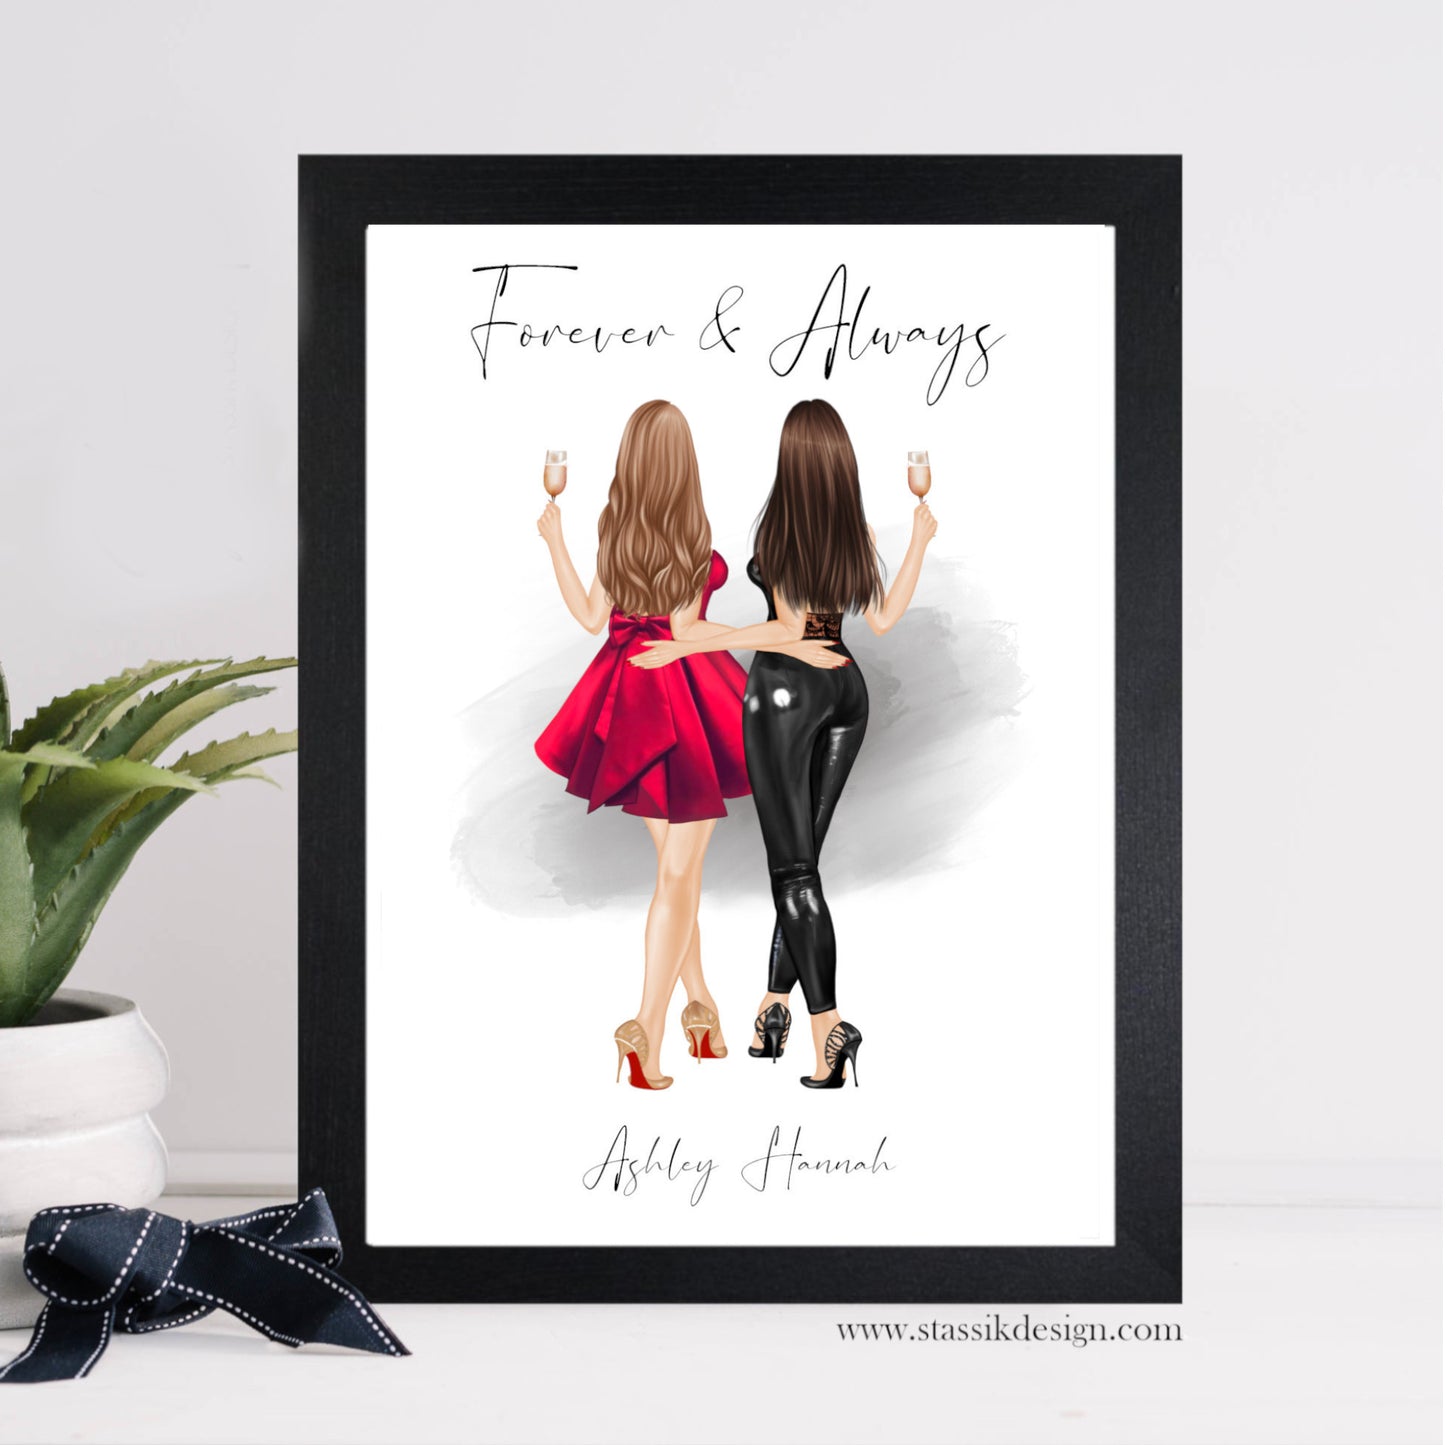 Personalised Best Friend Illustration Print - Girls night out